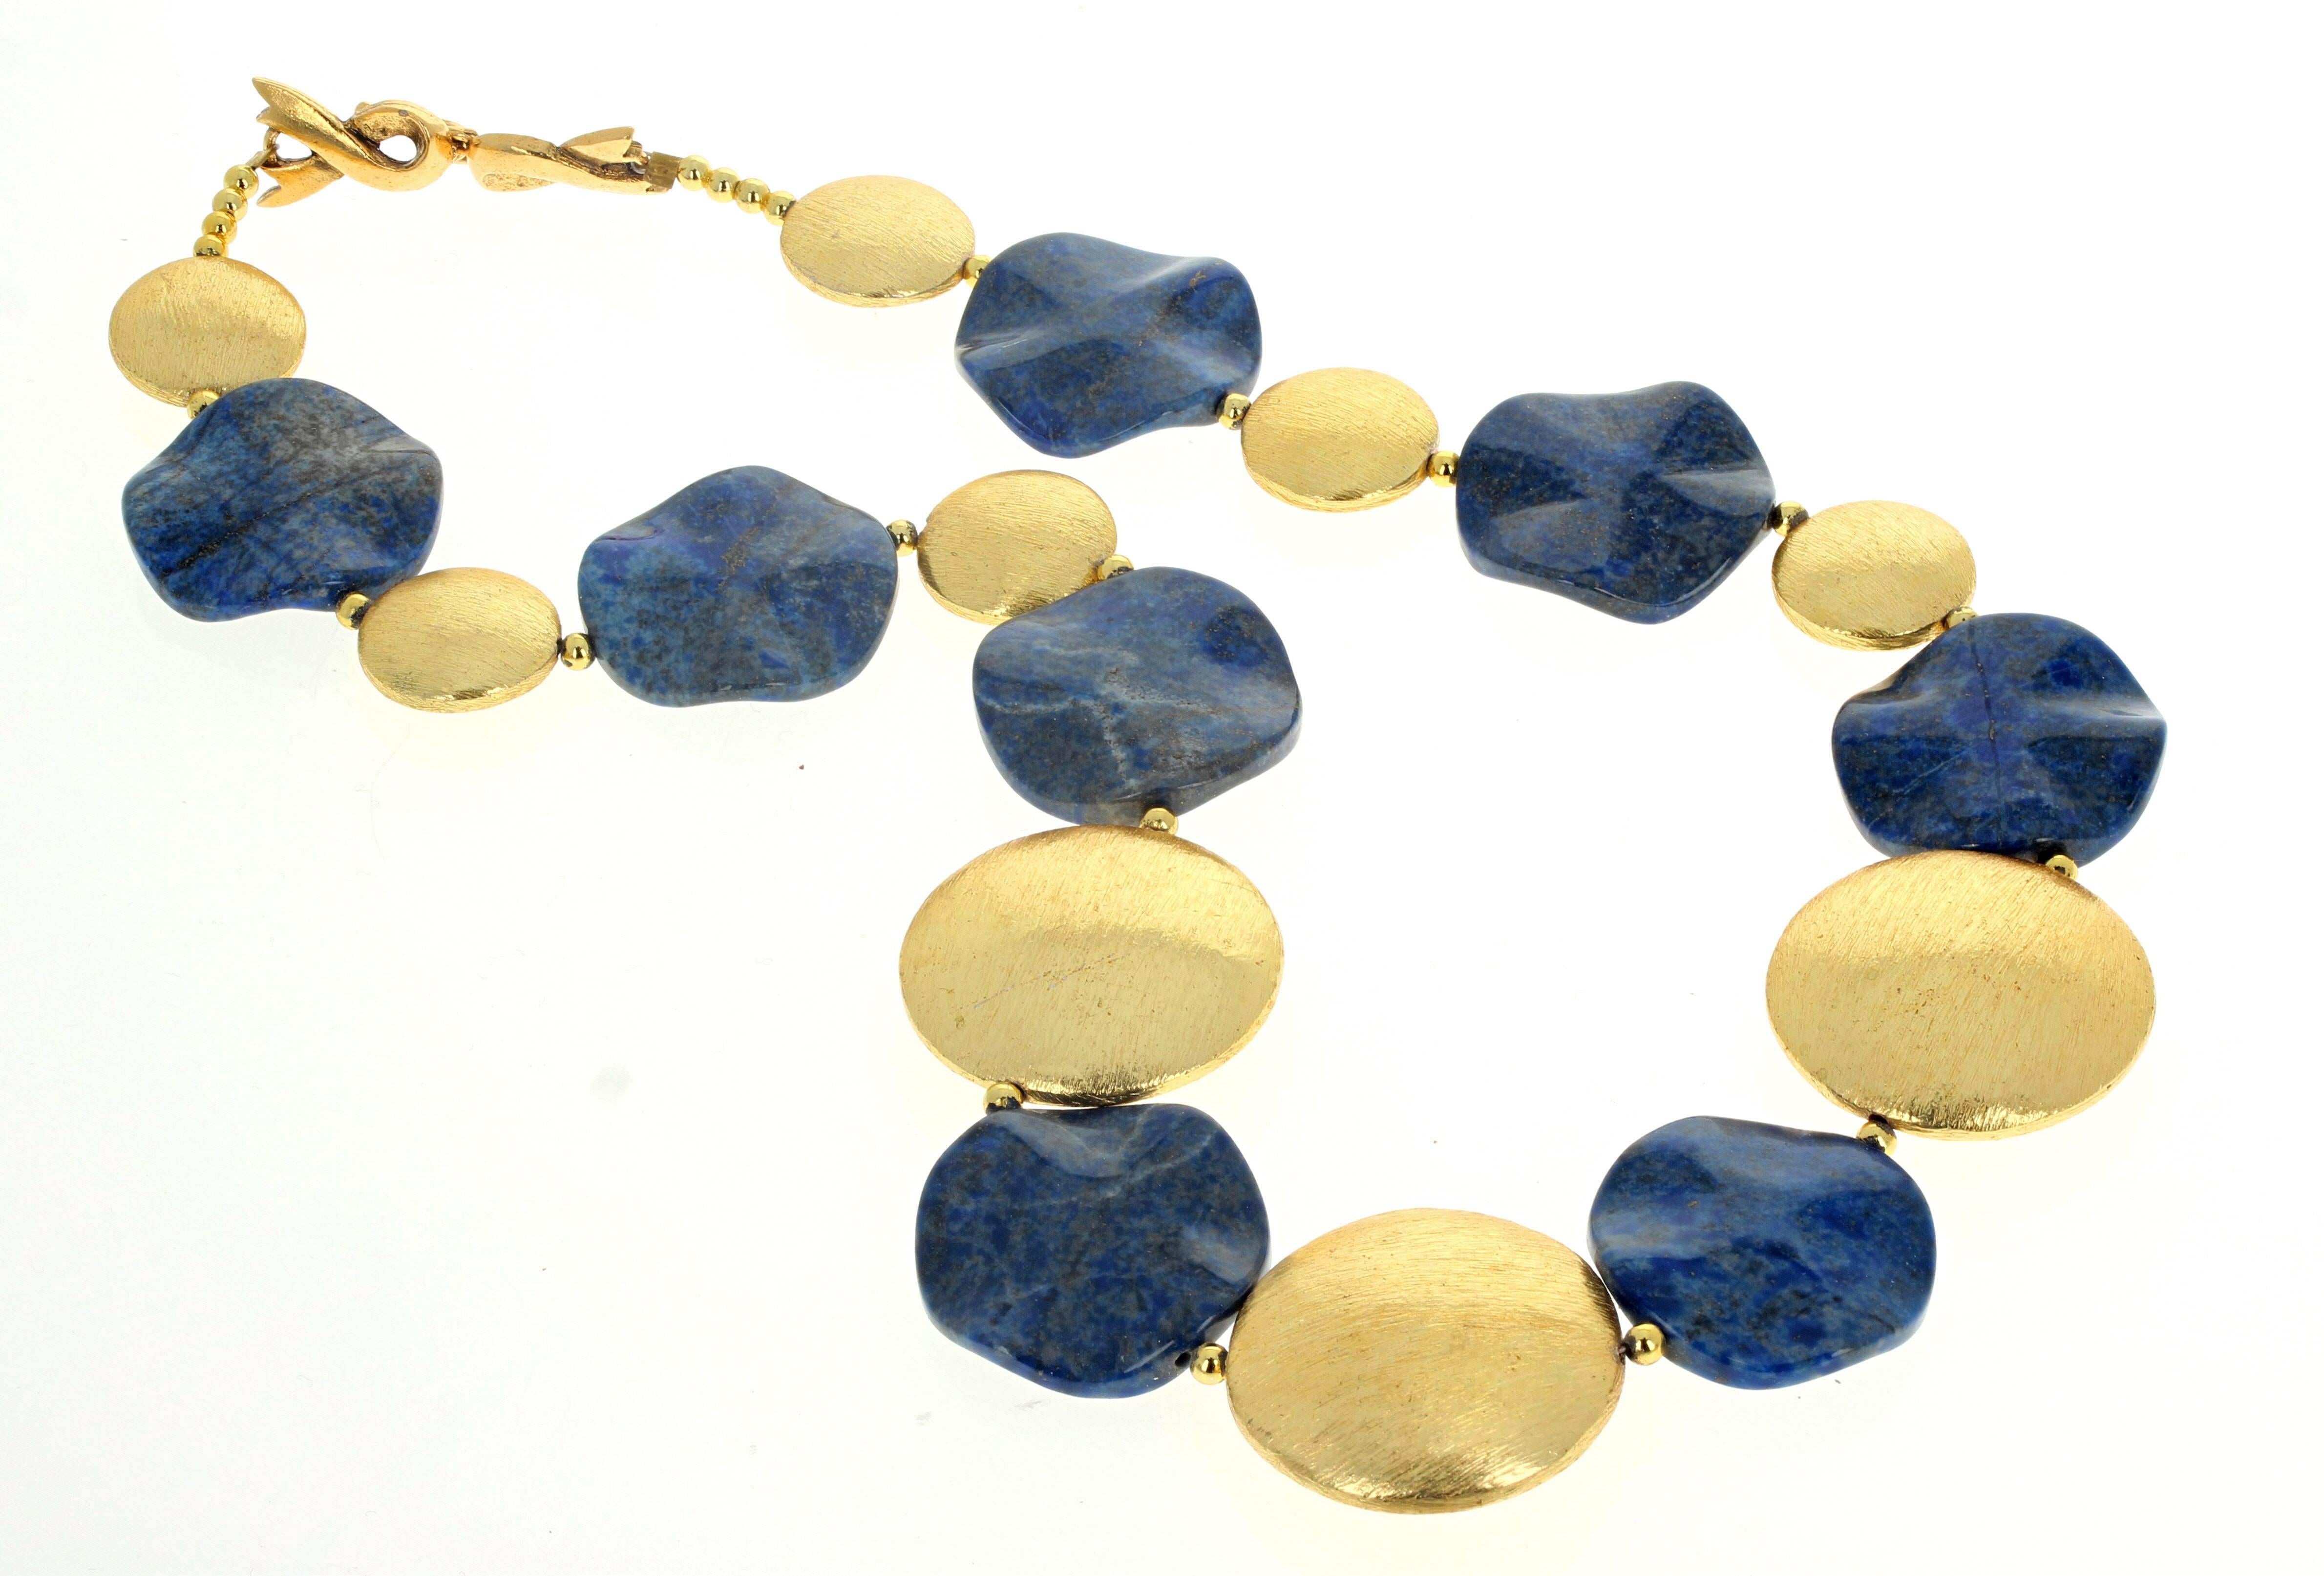 These beautifully cut and polished (approximately 20mm) rondels of natural Lapis Lazuli dangle happily between the gold plated rondels (largest 28mm) in this fascinatingly lovely necklace.  The gold plated clasp is and easy to use hook clasp.  